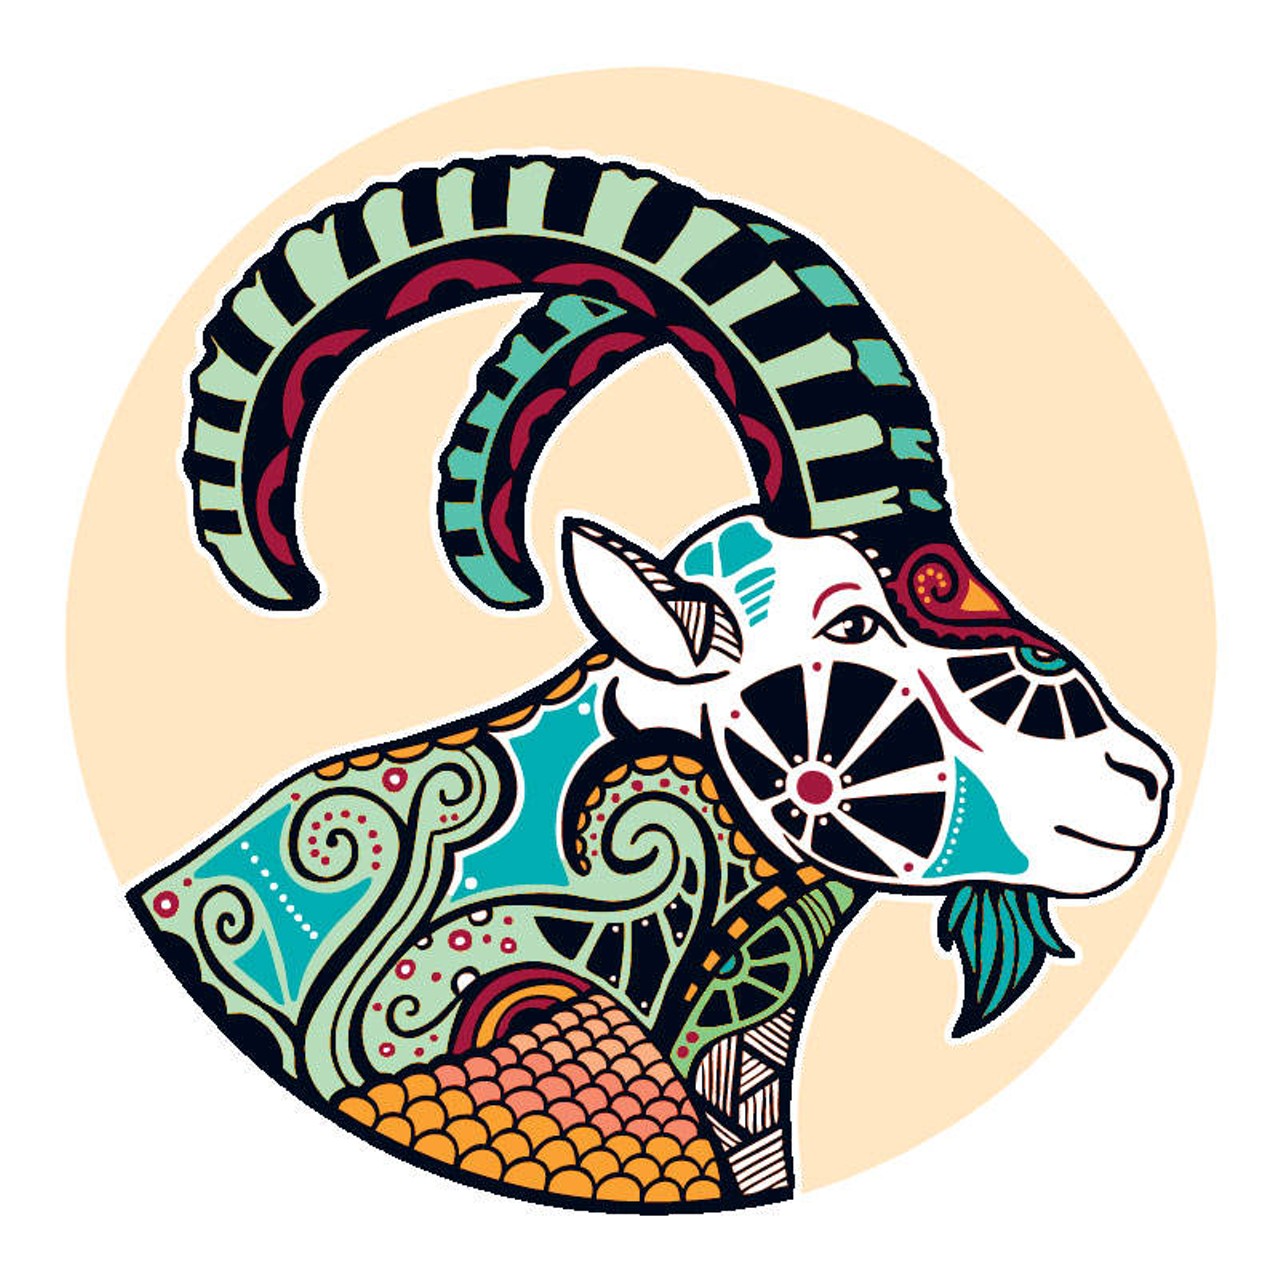 CAPRICORN (Dec. 21-Jan. 20): 
You should know enough to see what straddling the fence gets you. Too many things have been lost to your need to hide from the truth, or have it both ways. You need to reflect upon the past long enough to accept the need to take a stand this time. Whatever you think you&#146;ll lose by stating your case will only be lost if you say nothing. In the act of playing both ends to the middle it becomes hard for anyone to respect us. You need to take a risk and choose. Controlling the outcome has less to do with strategic indecisiveness than it does with knowing who you are.